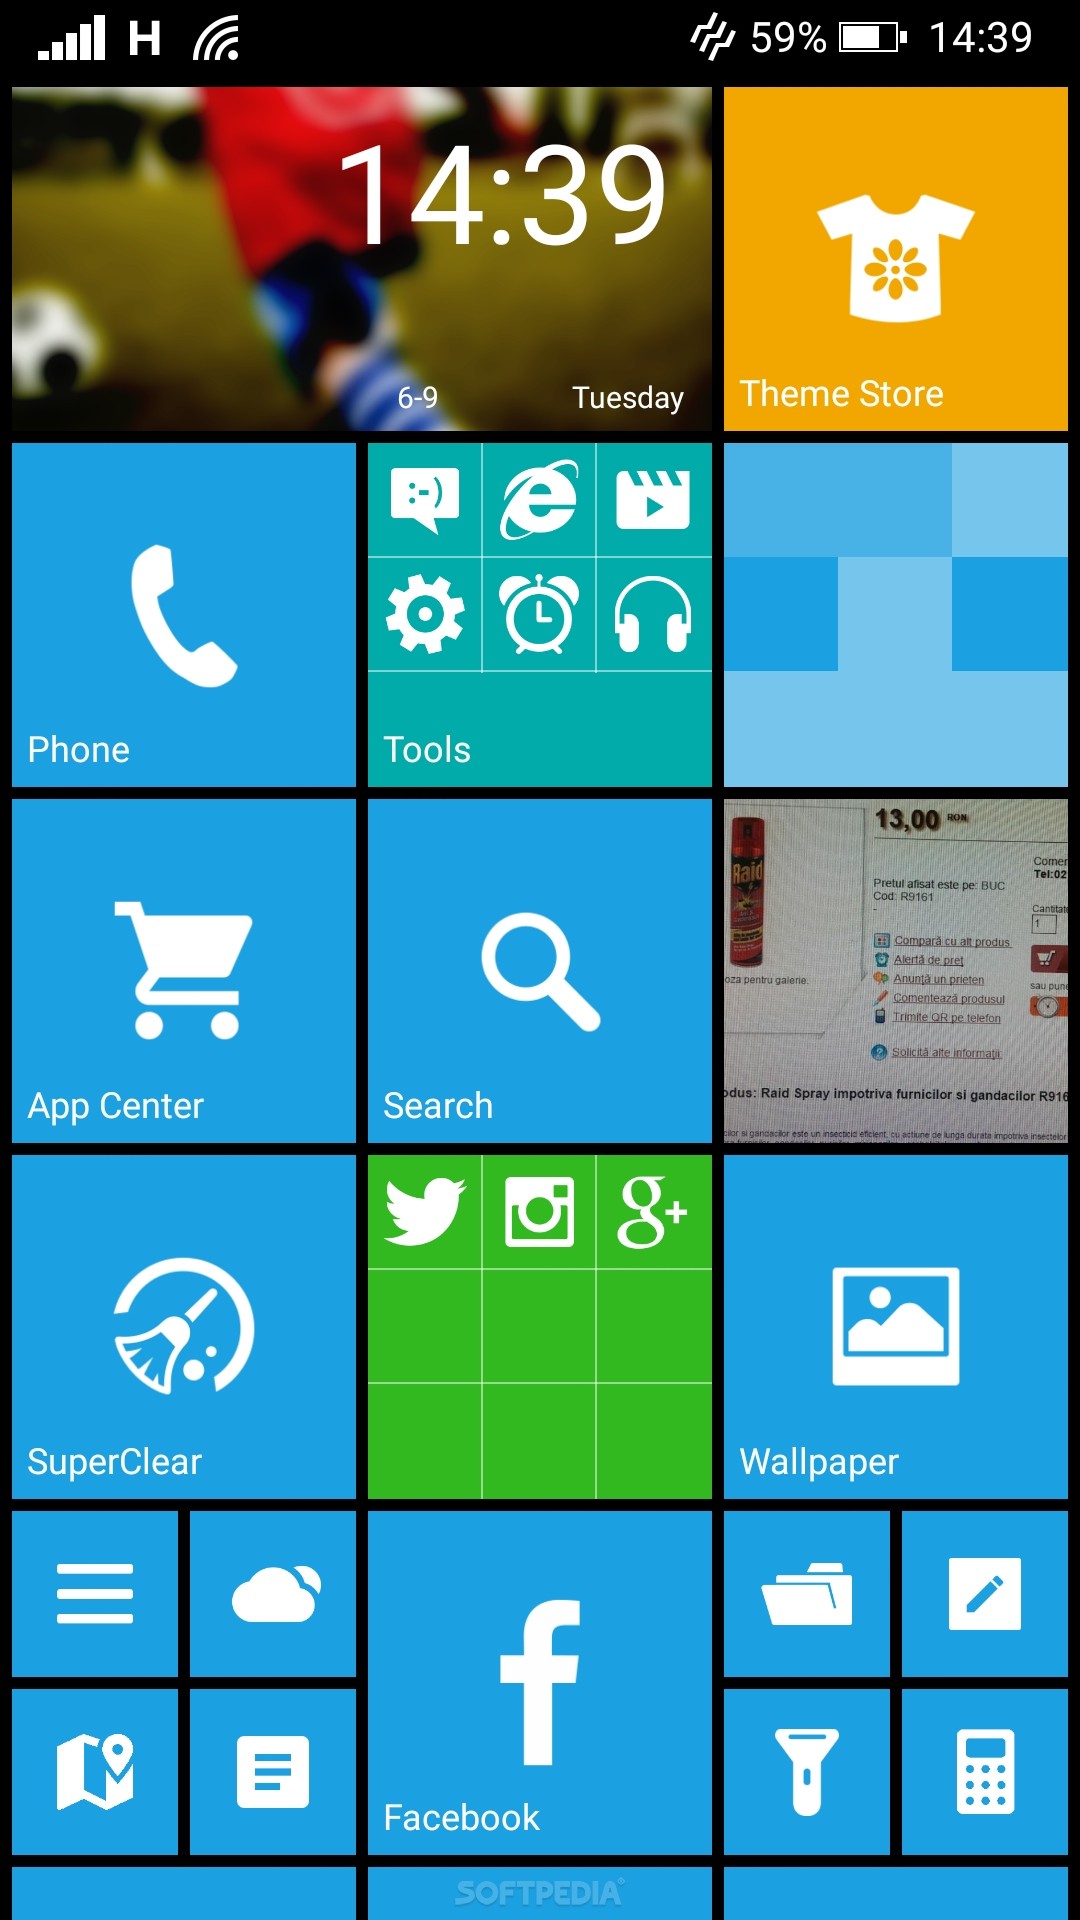 android windows 10 launcher